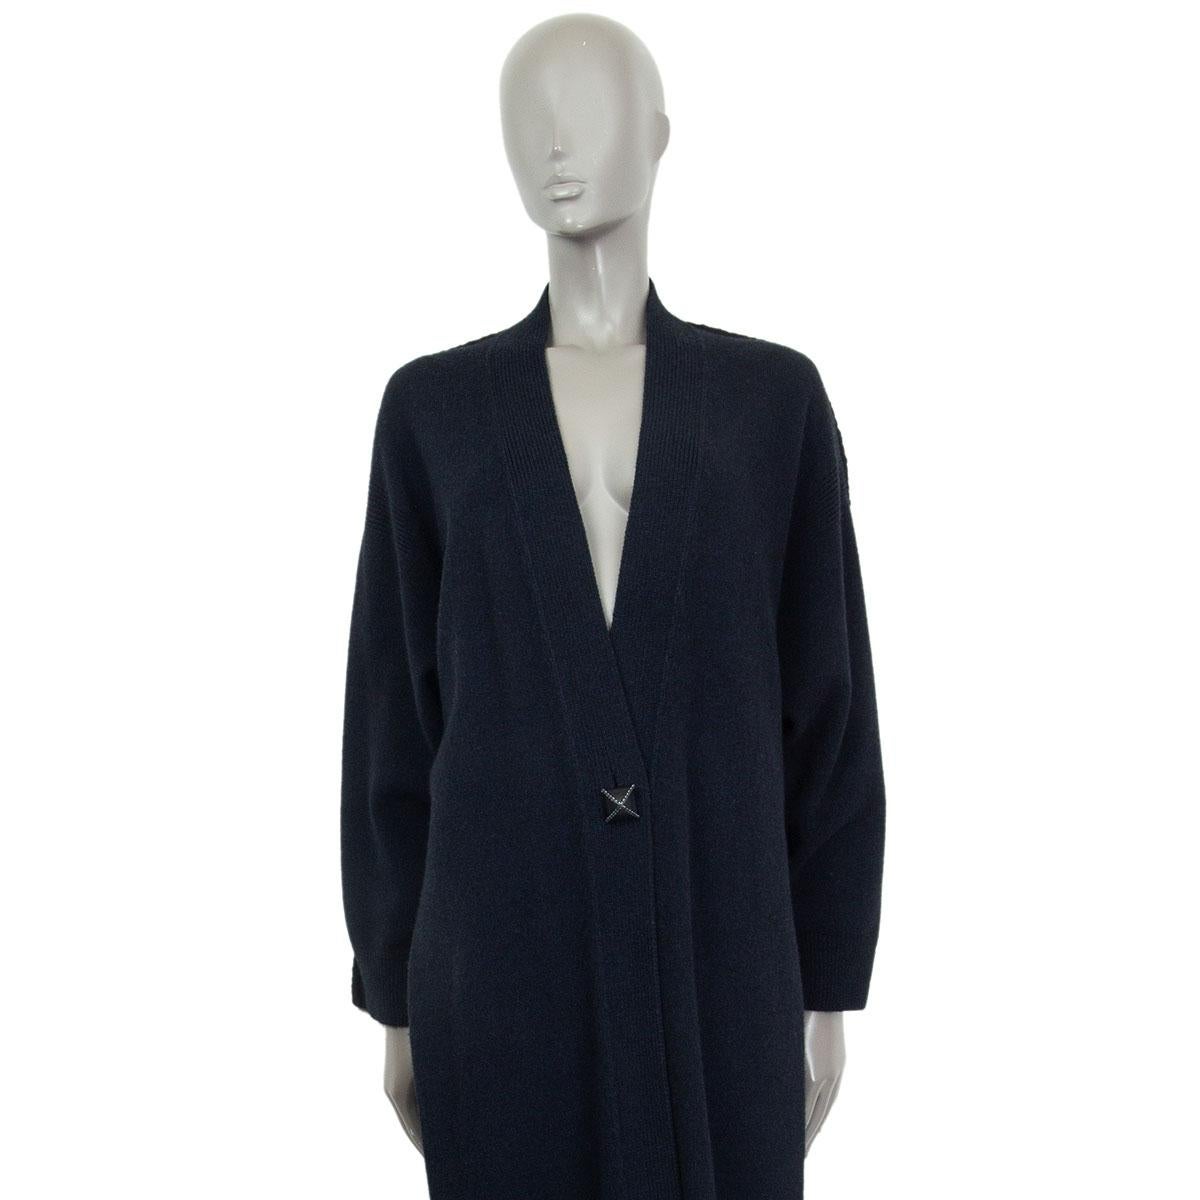 Hermès oversized long cardigan in midnight blue (front) and black (back) cashmere (100%). Closes with a leather-covered pyramid button and has two slits on the side. Has been worn and is in excellent condition. 

Tag Size 34
Size XXS
Shoulder Width